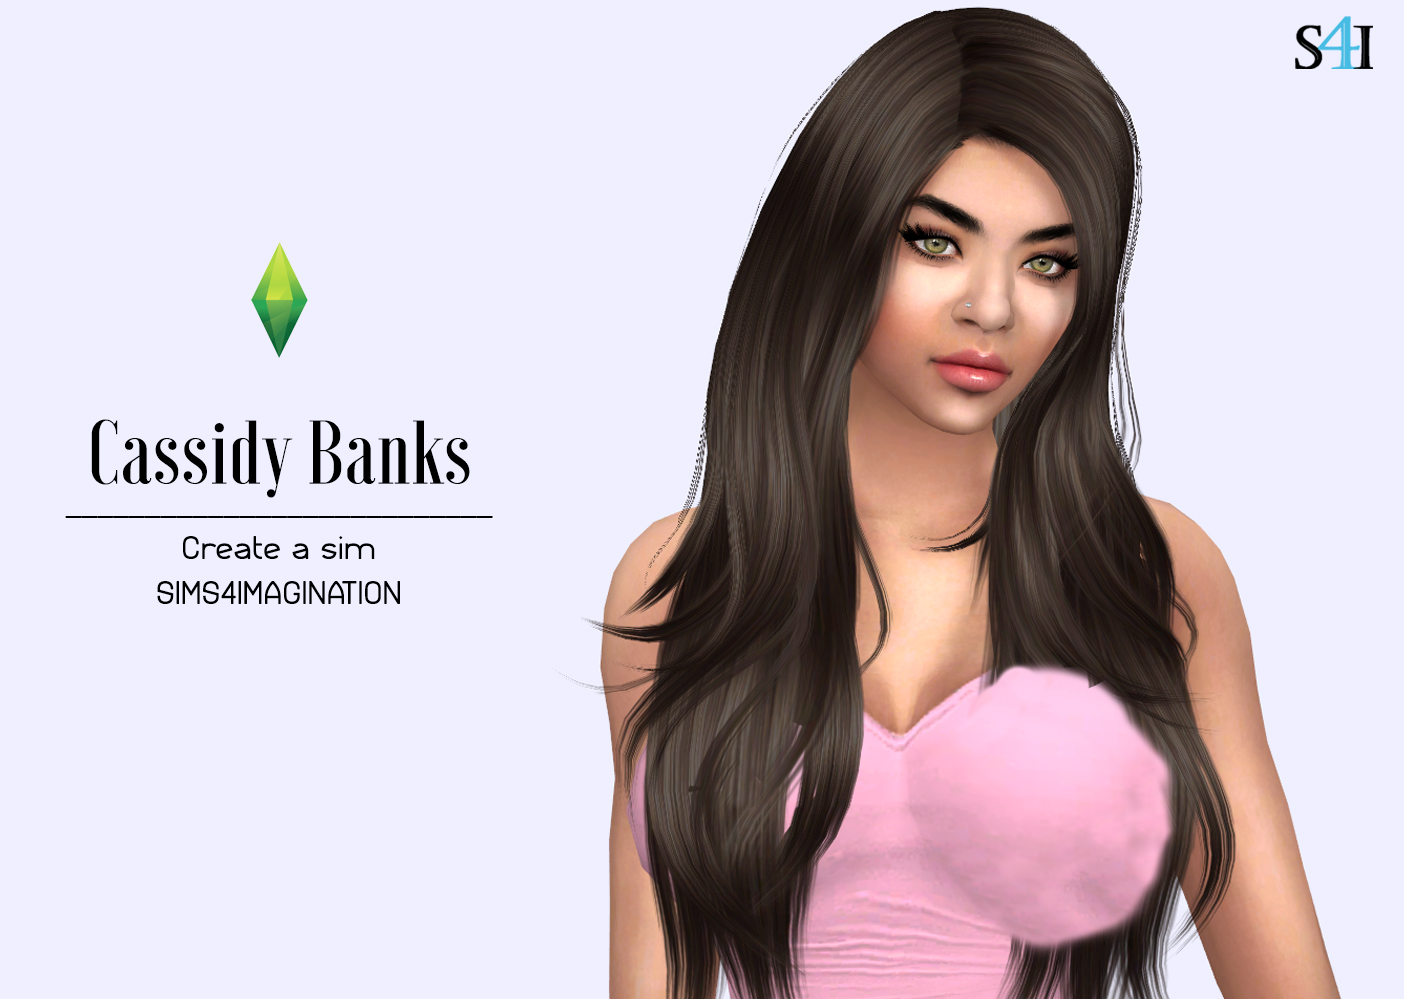 My Sims 4 Cas Cassidy Banks Patreon Imagination Sims 4 Cas